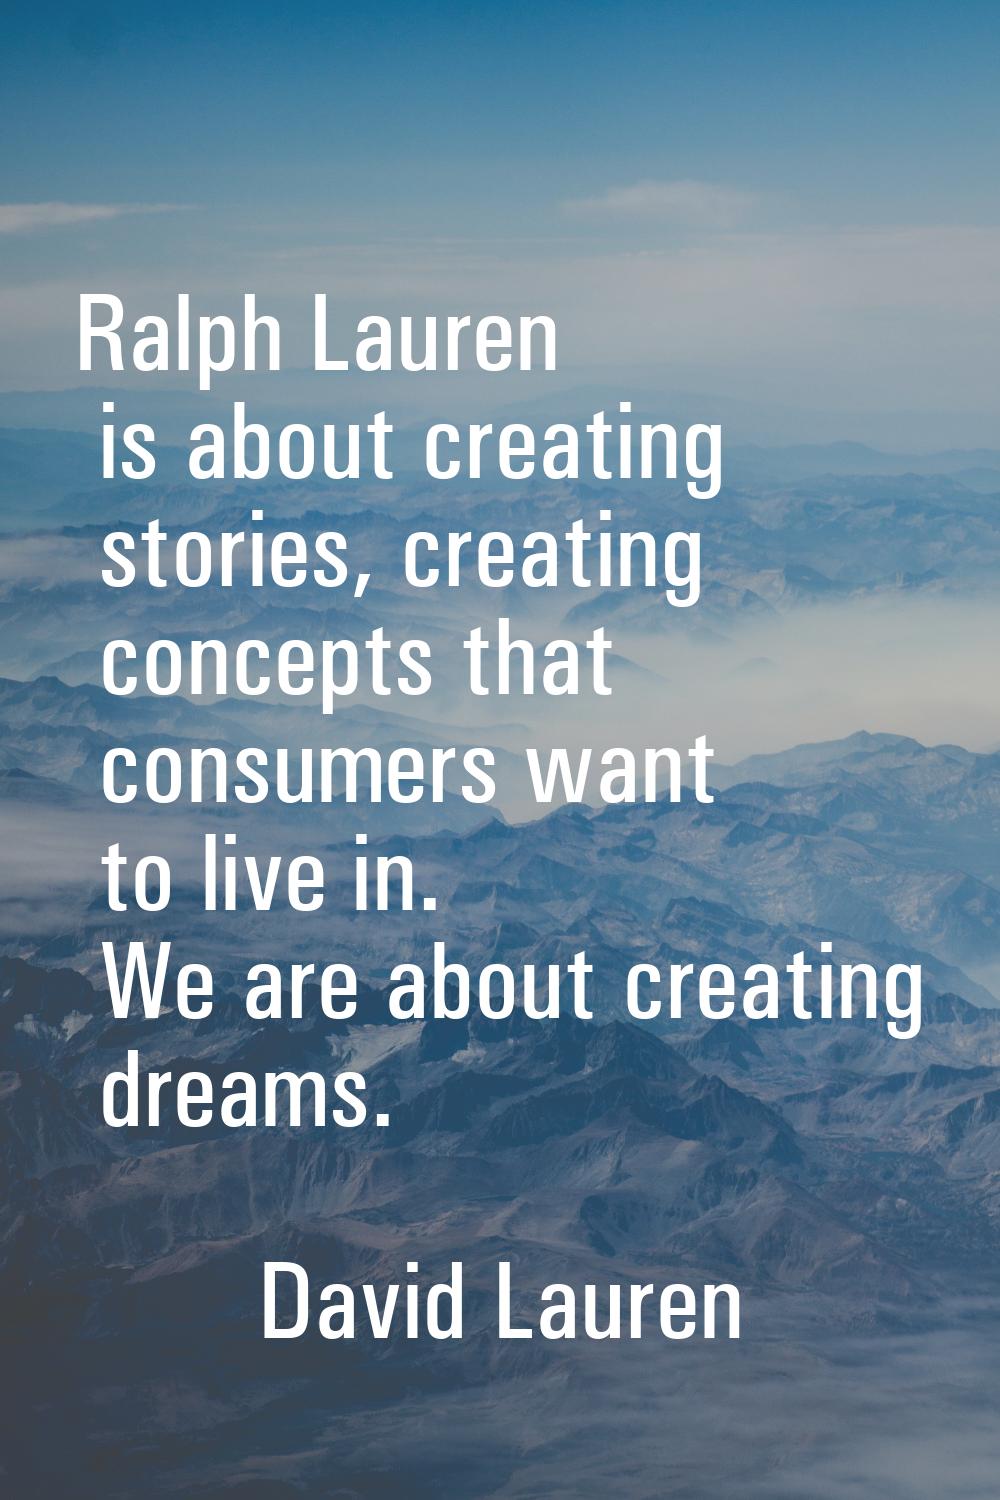 Ralph Lauren is about creating stories, creating concepts that consumers want to live in. We are ab